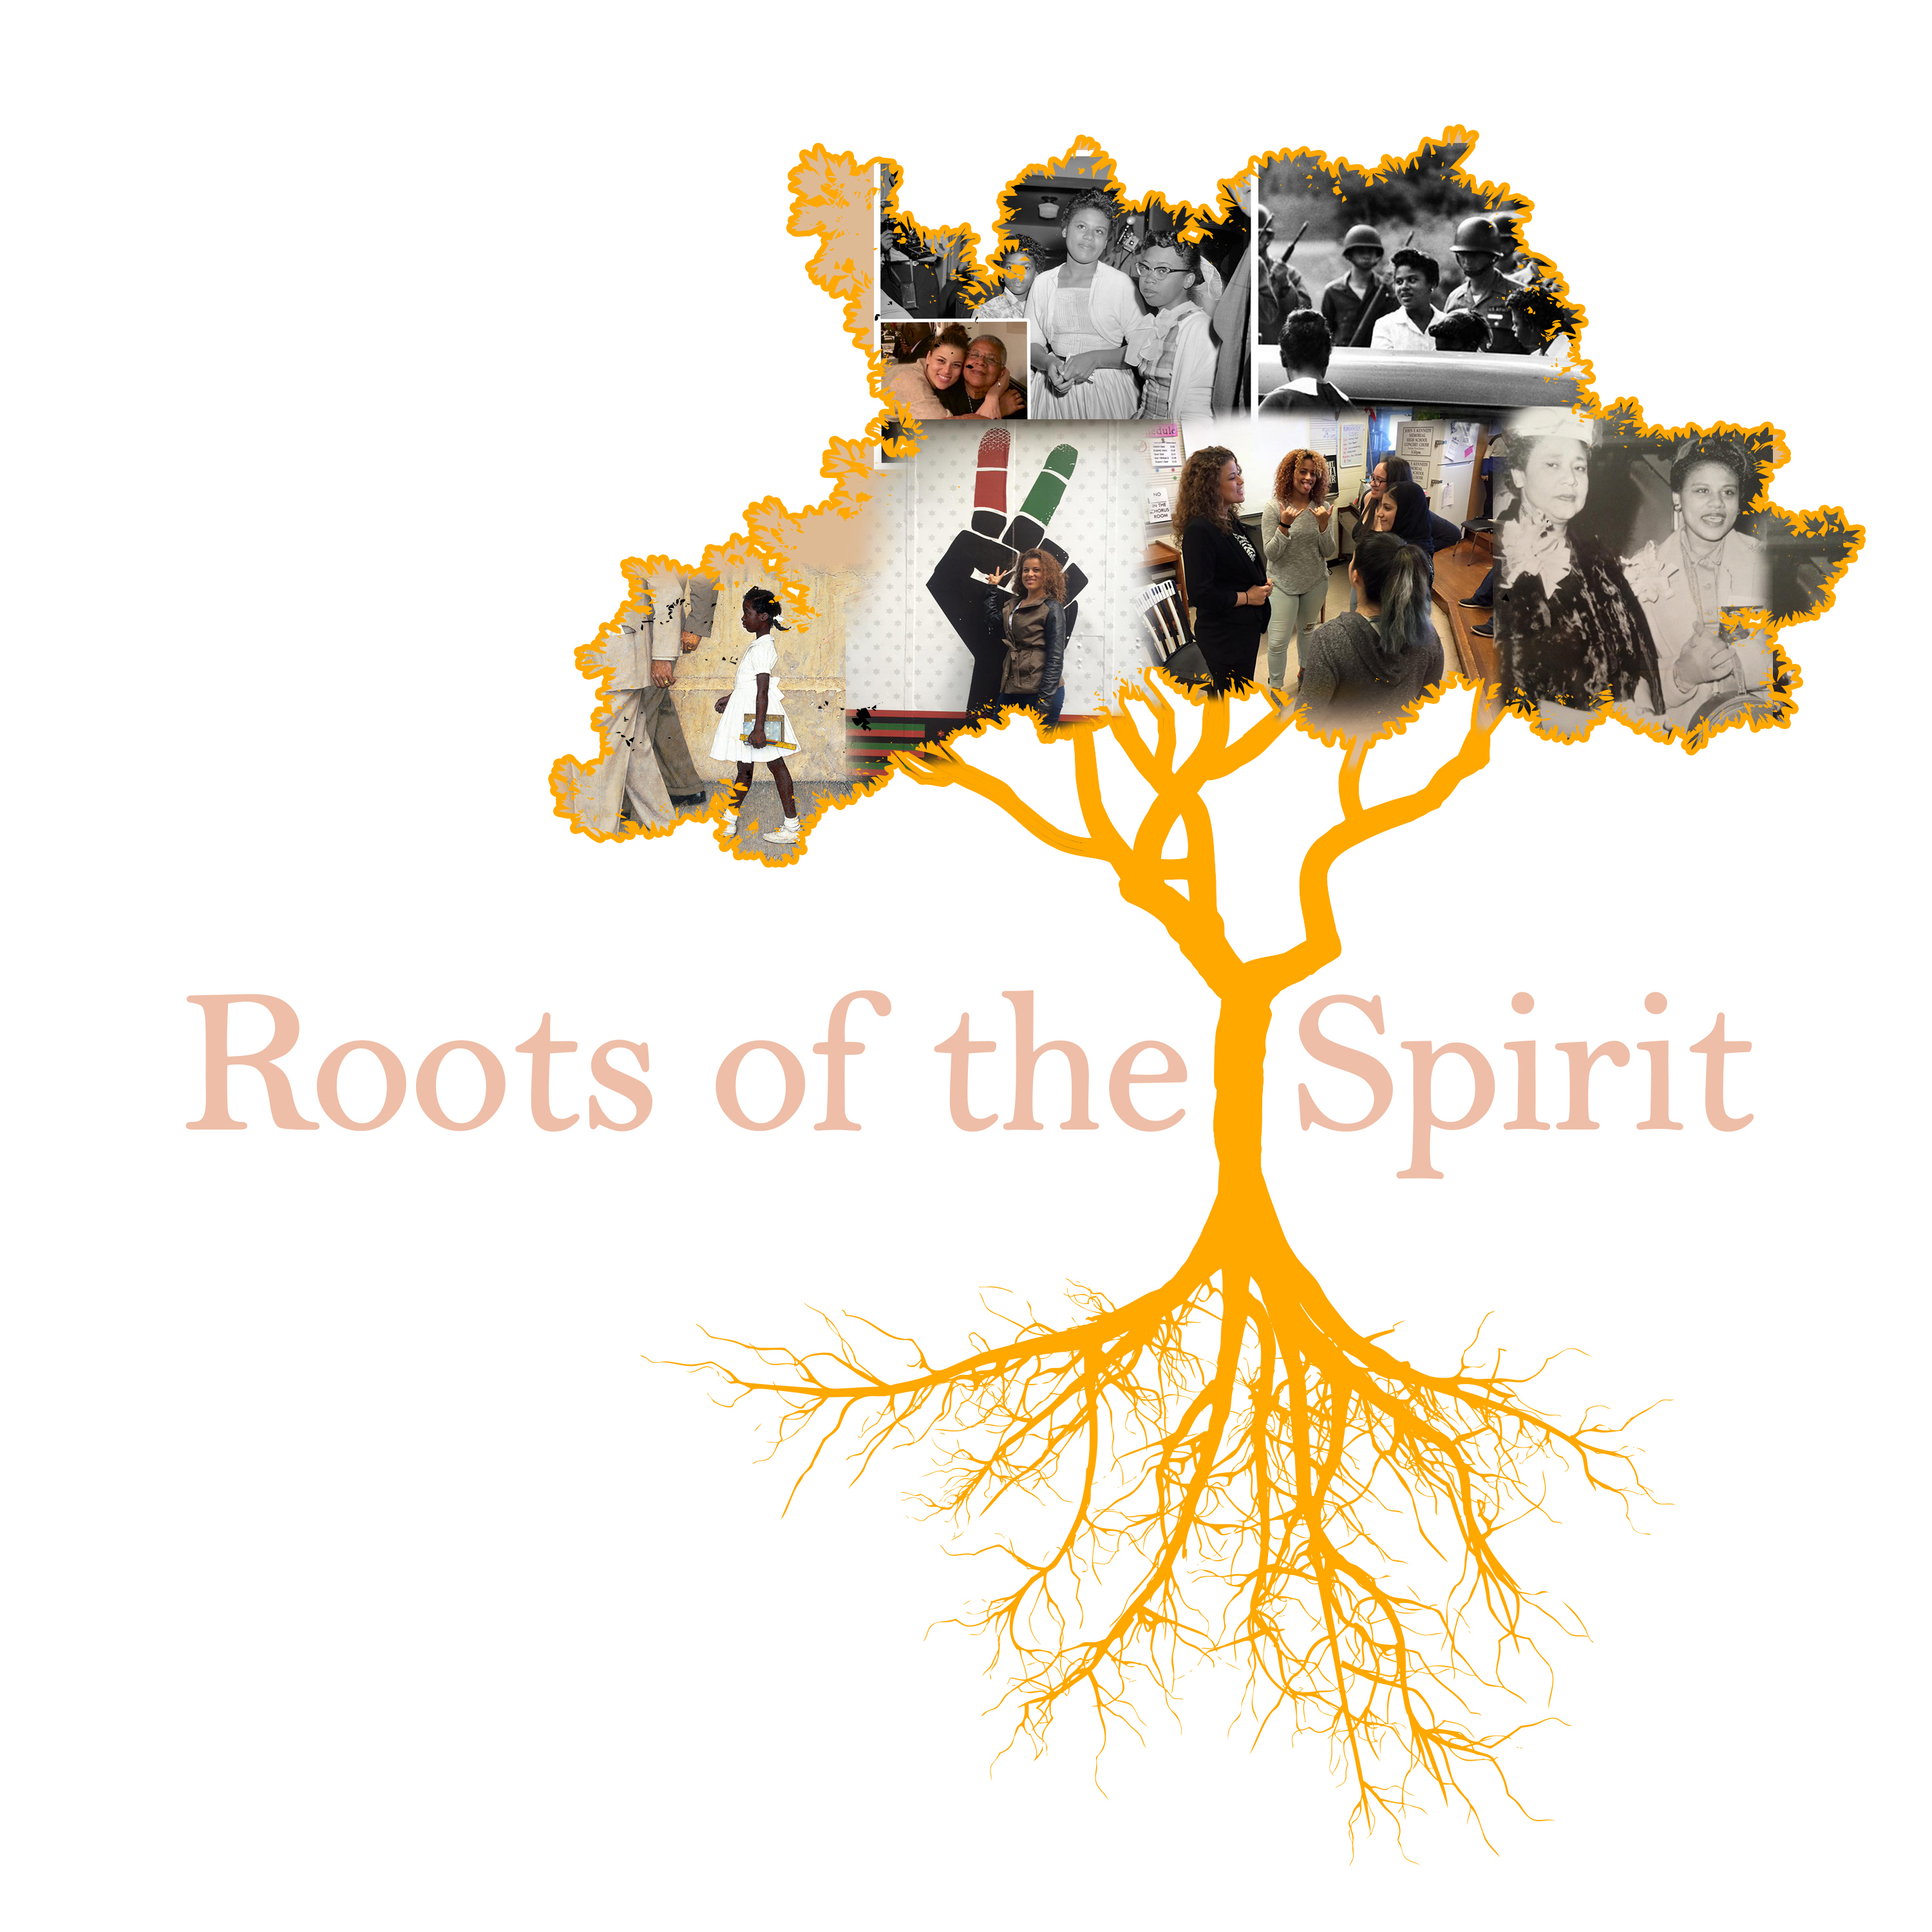 Roots of the Spirit